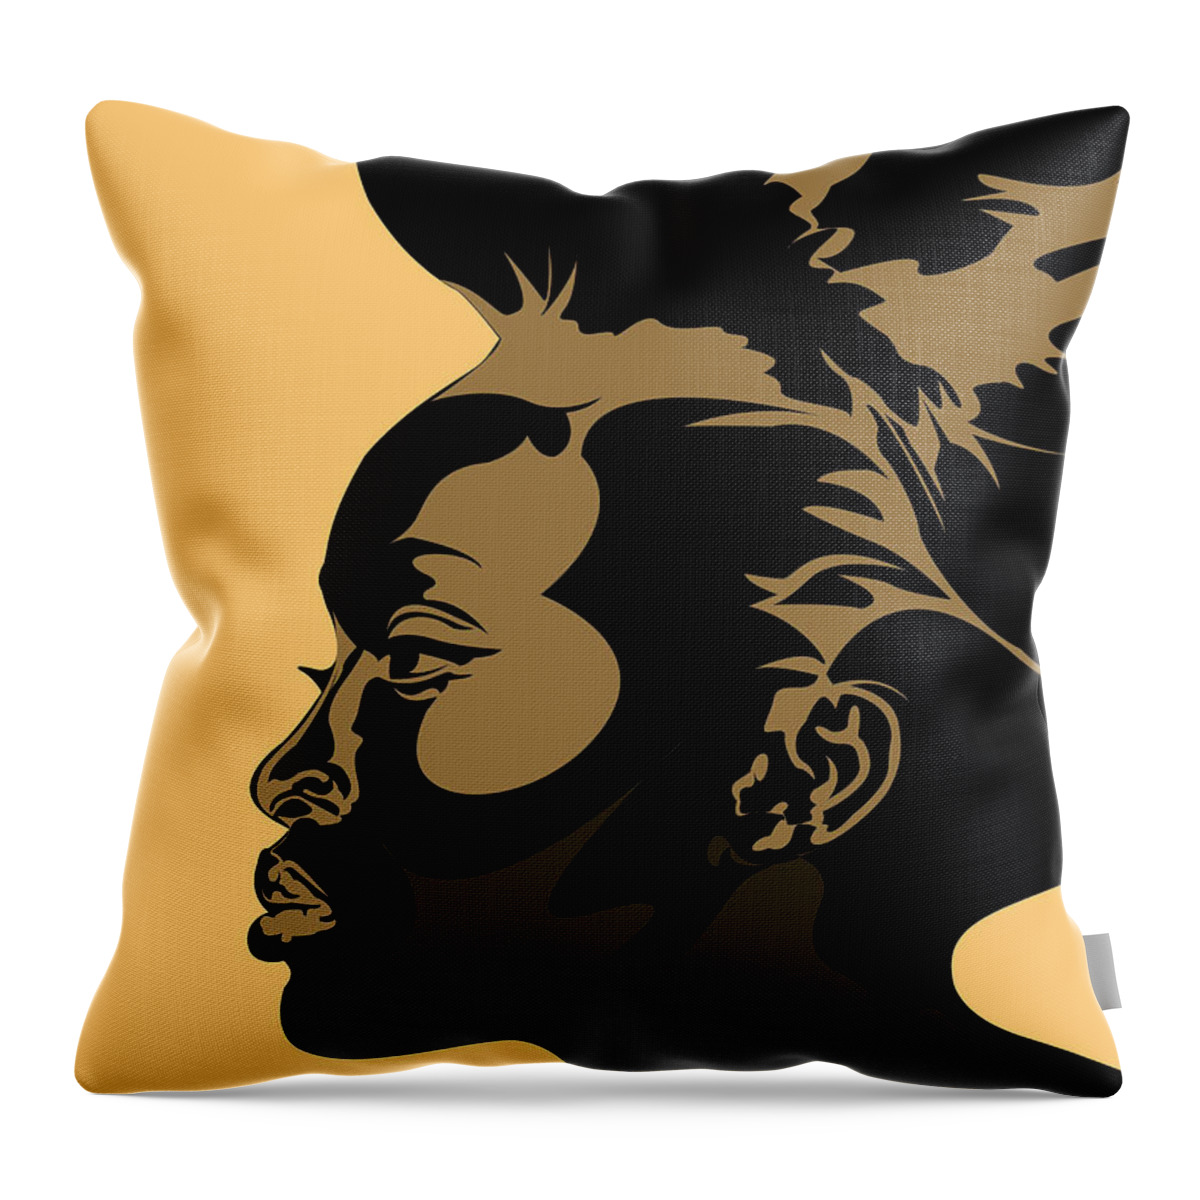 Queen Throw Pillow featuring the digital art Updoo by Scheme Of Things Graphics